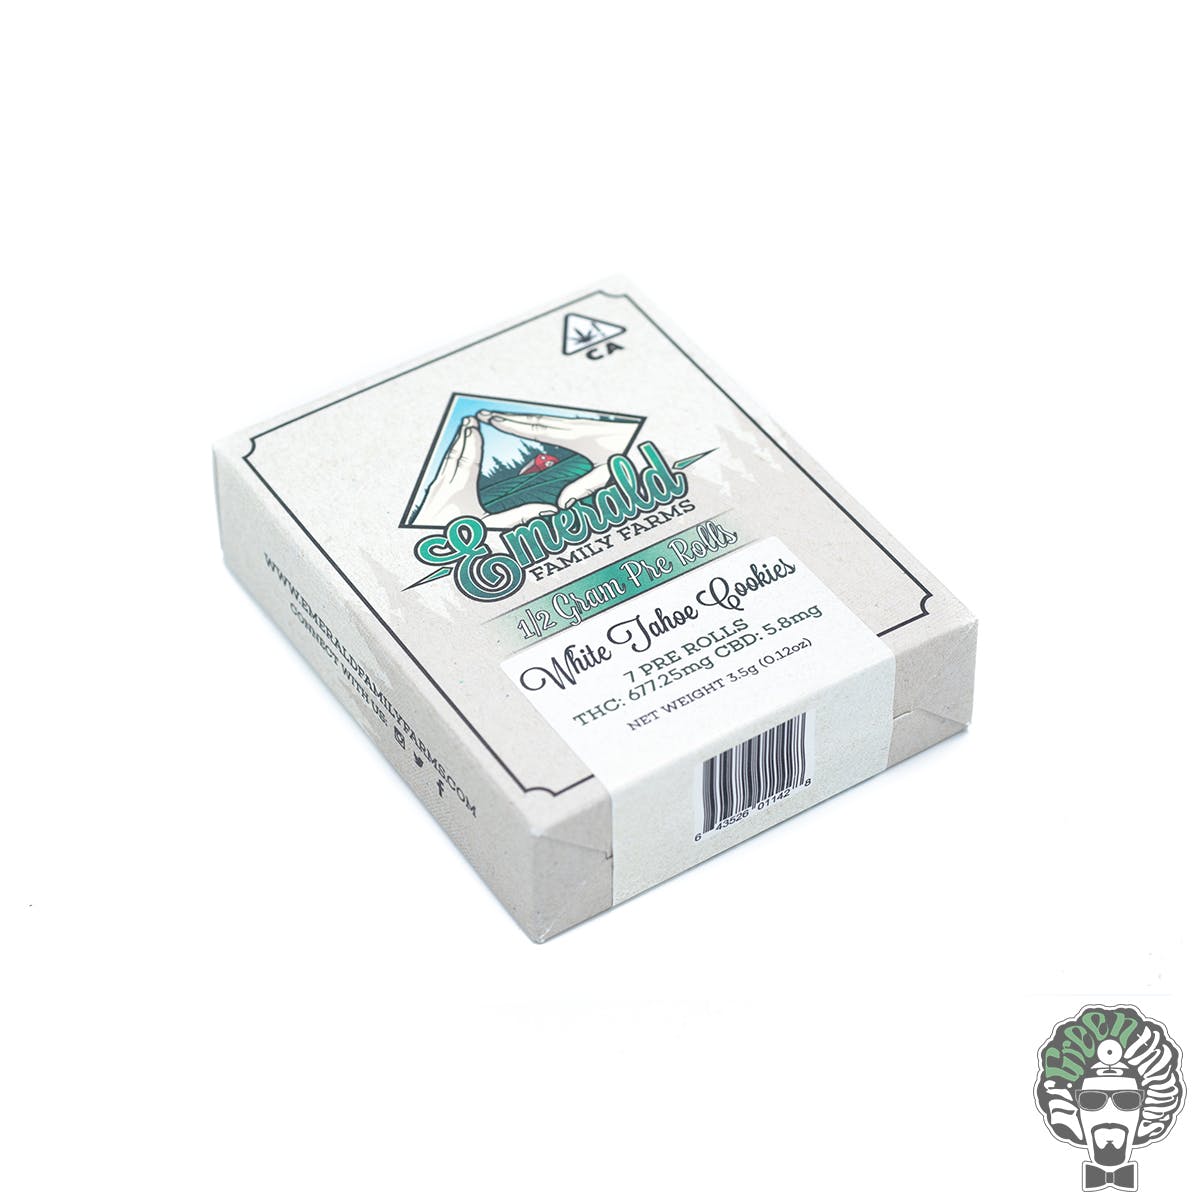 White Tahoe Cookies (7 Pack Rolls) by Emerald